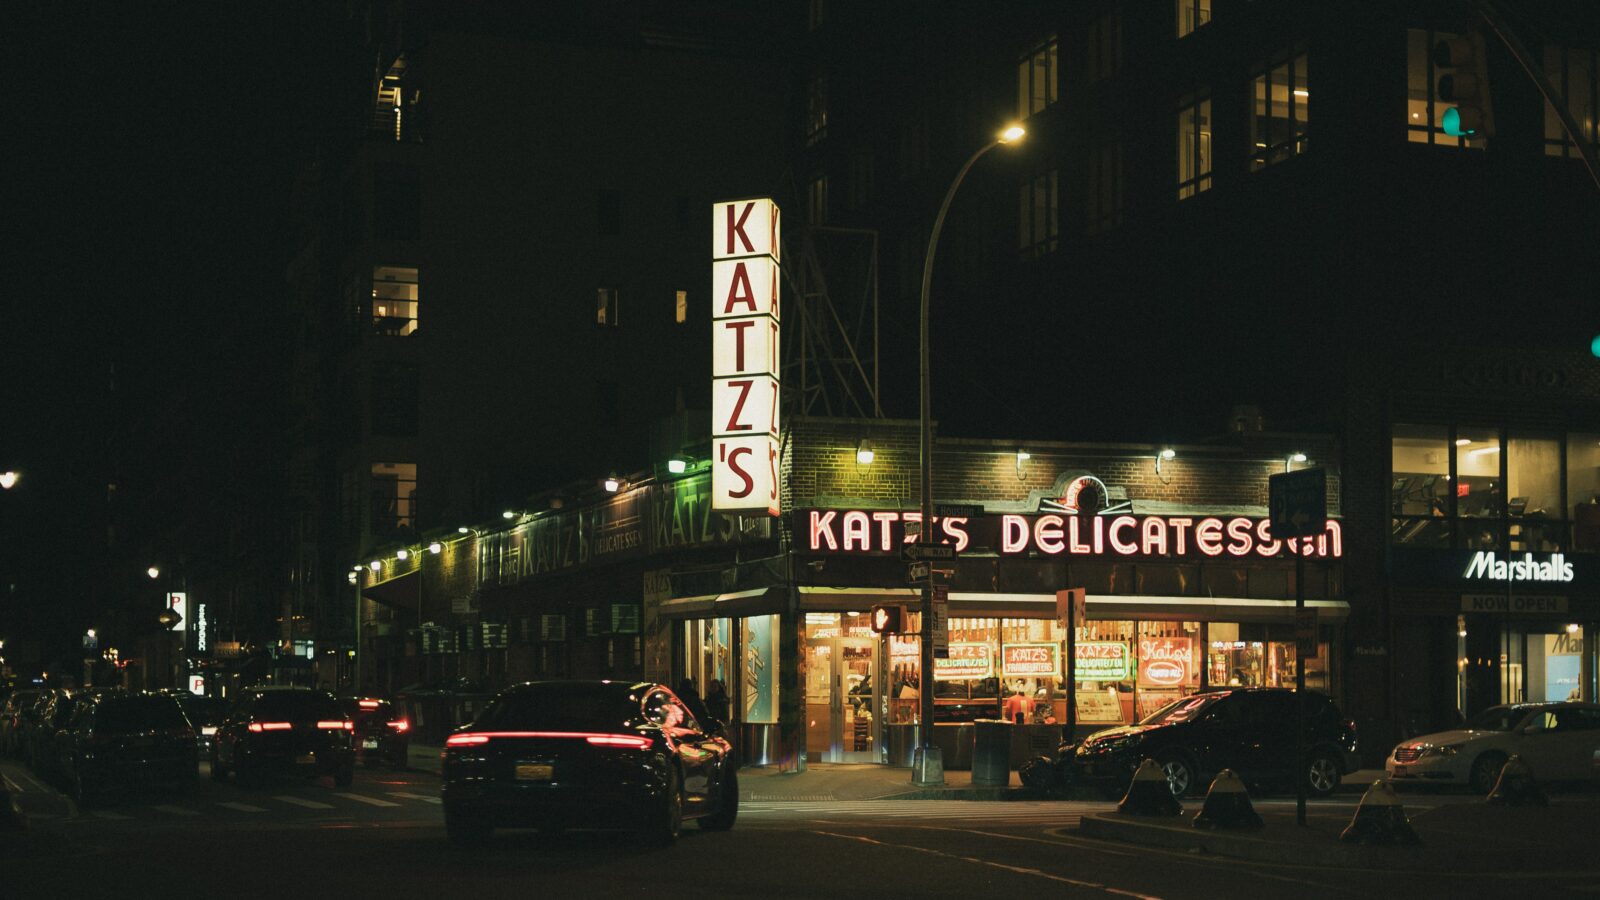 katz deli in lower east side new york at night